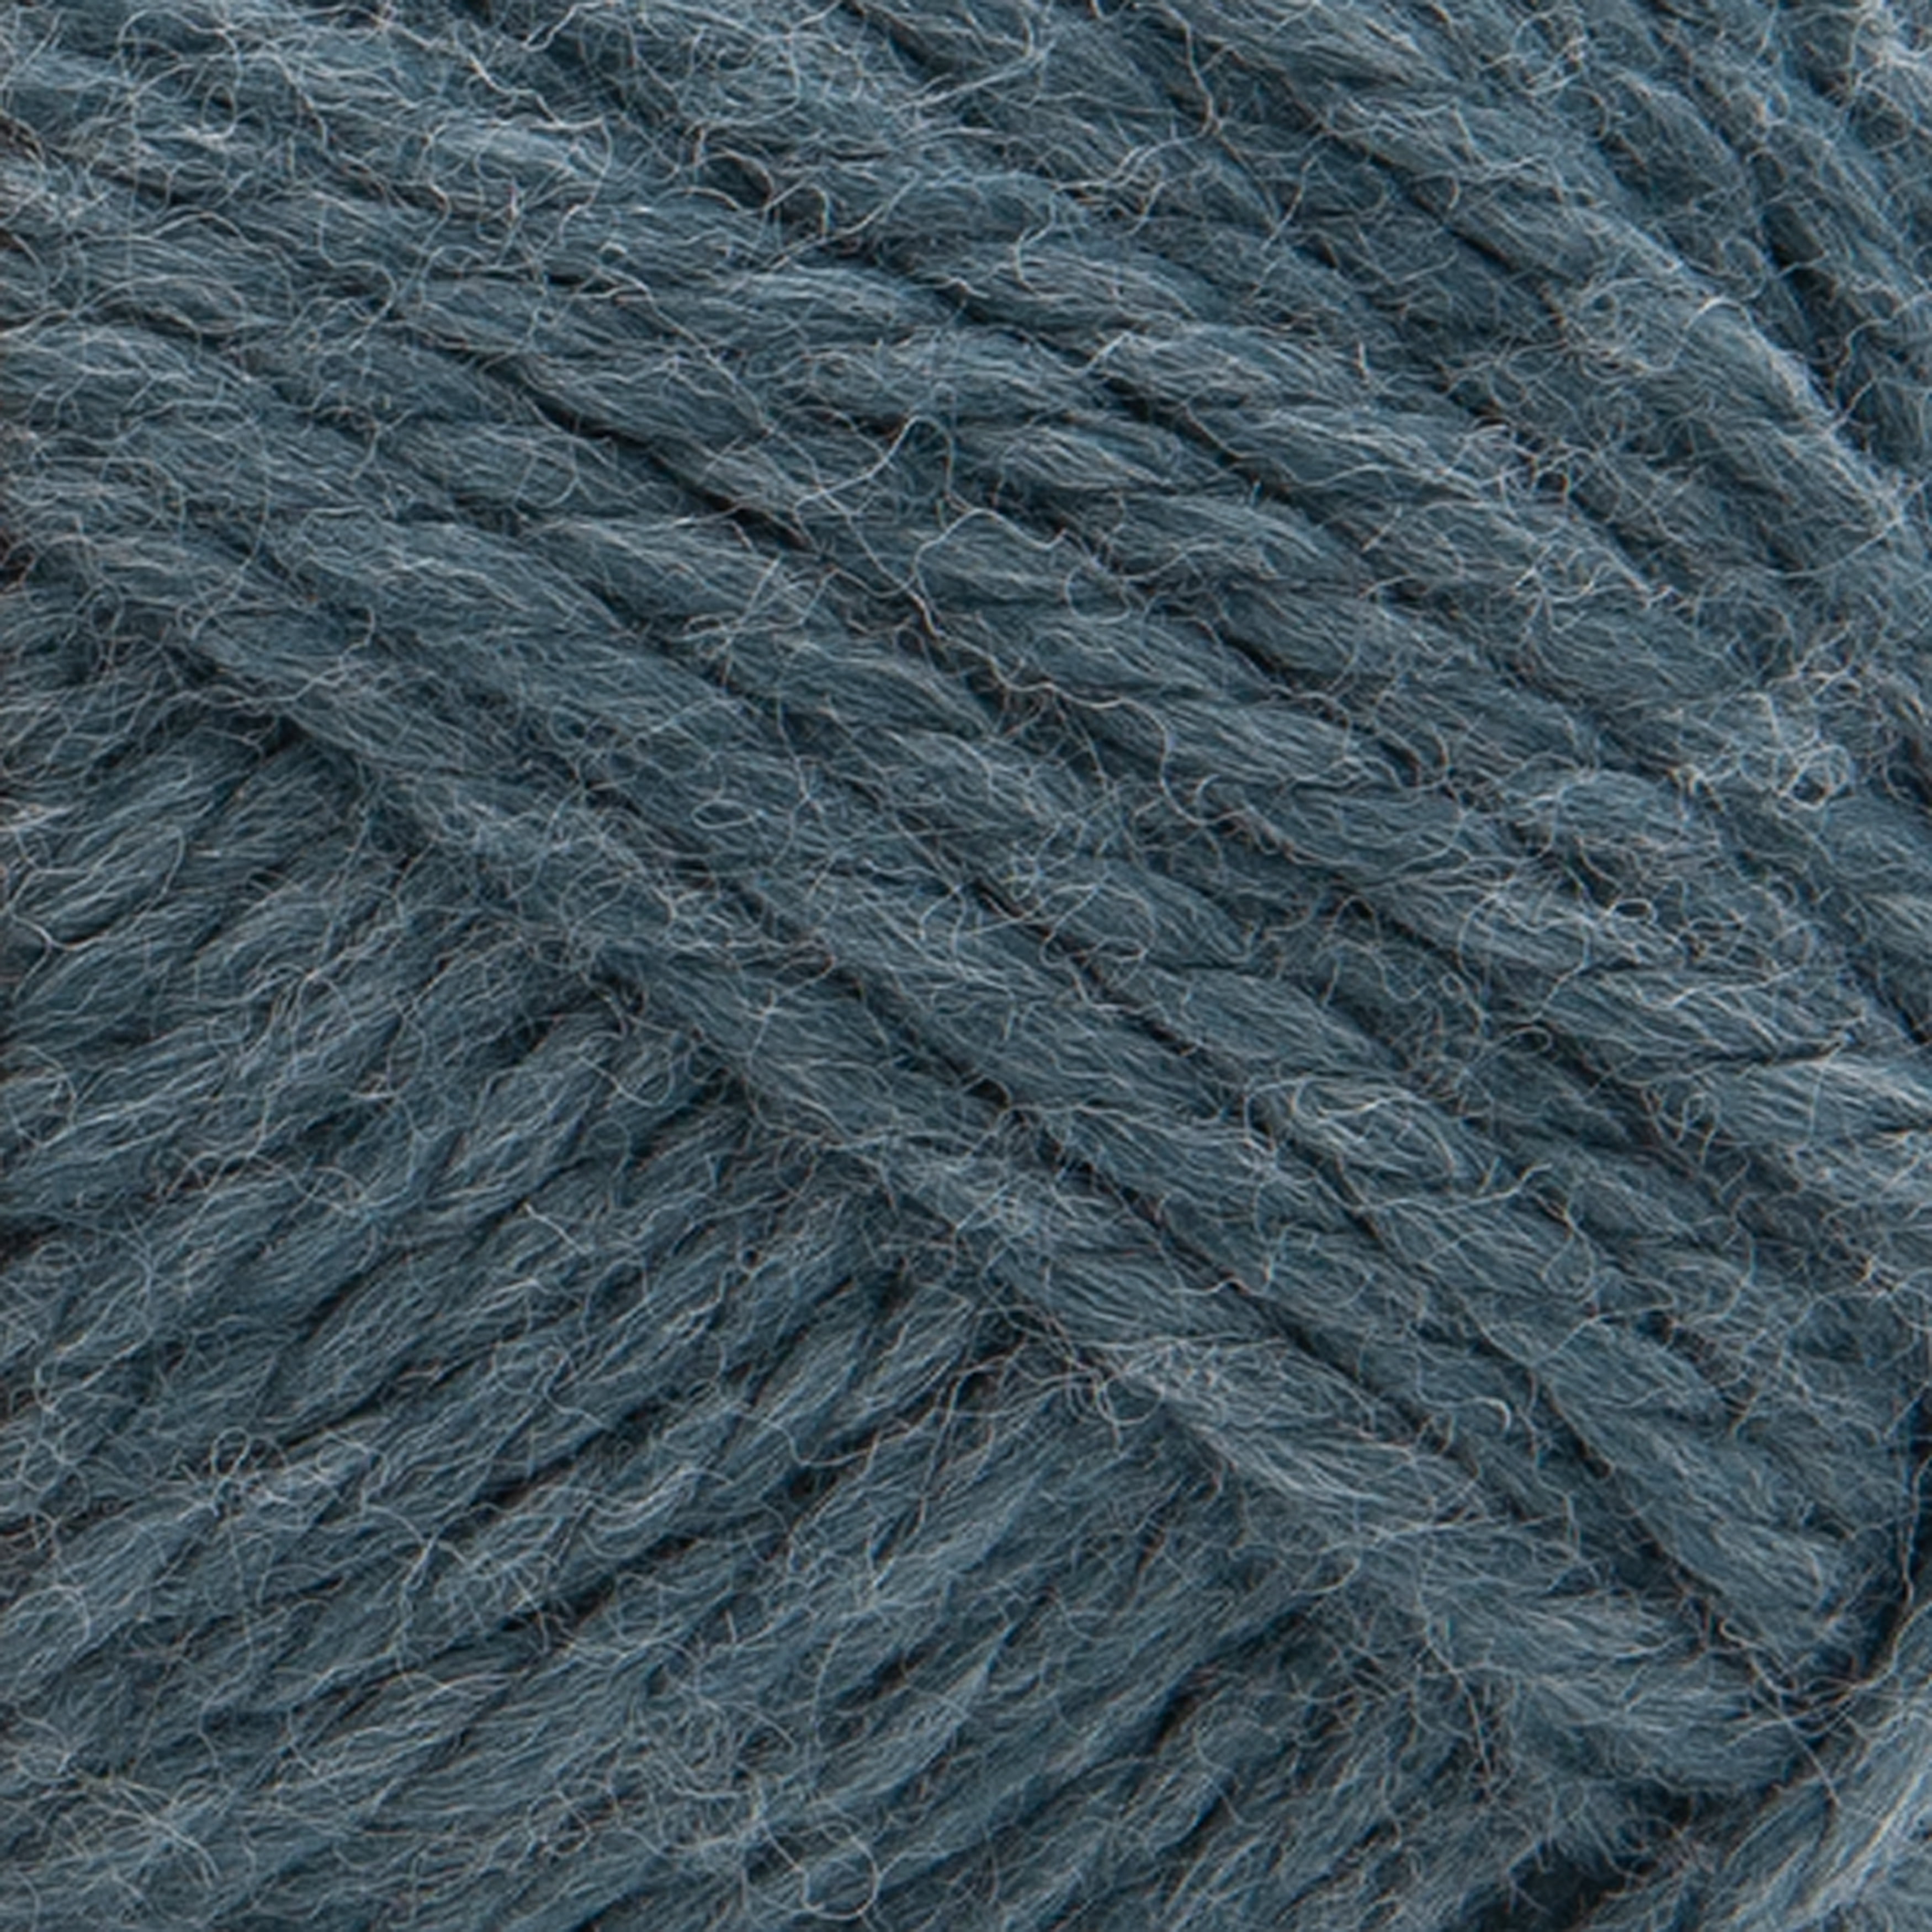 Lion Brand Yarn Re-Spun Thick & Quick Evergreen Super Bulky Recycled  Polyester Green Yarn 1 Pack 